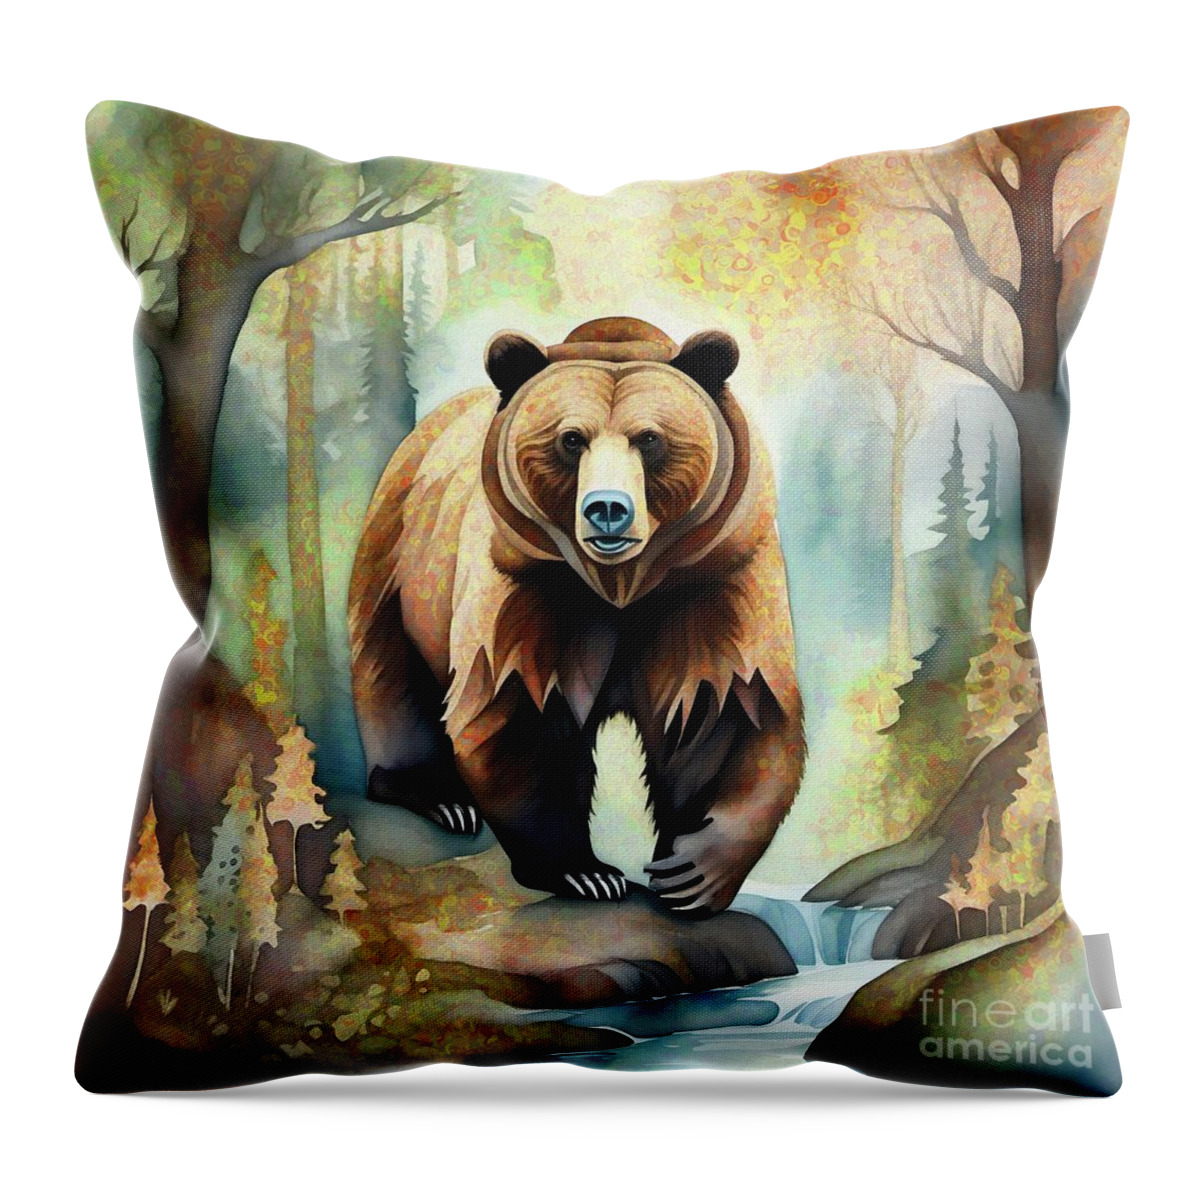 Abstract Throw Pillow featuring the digital art Grizzly Bear In The Forest - 02153 by Philip Preston